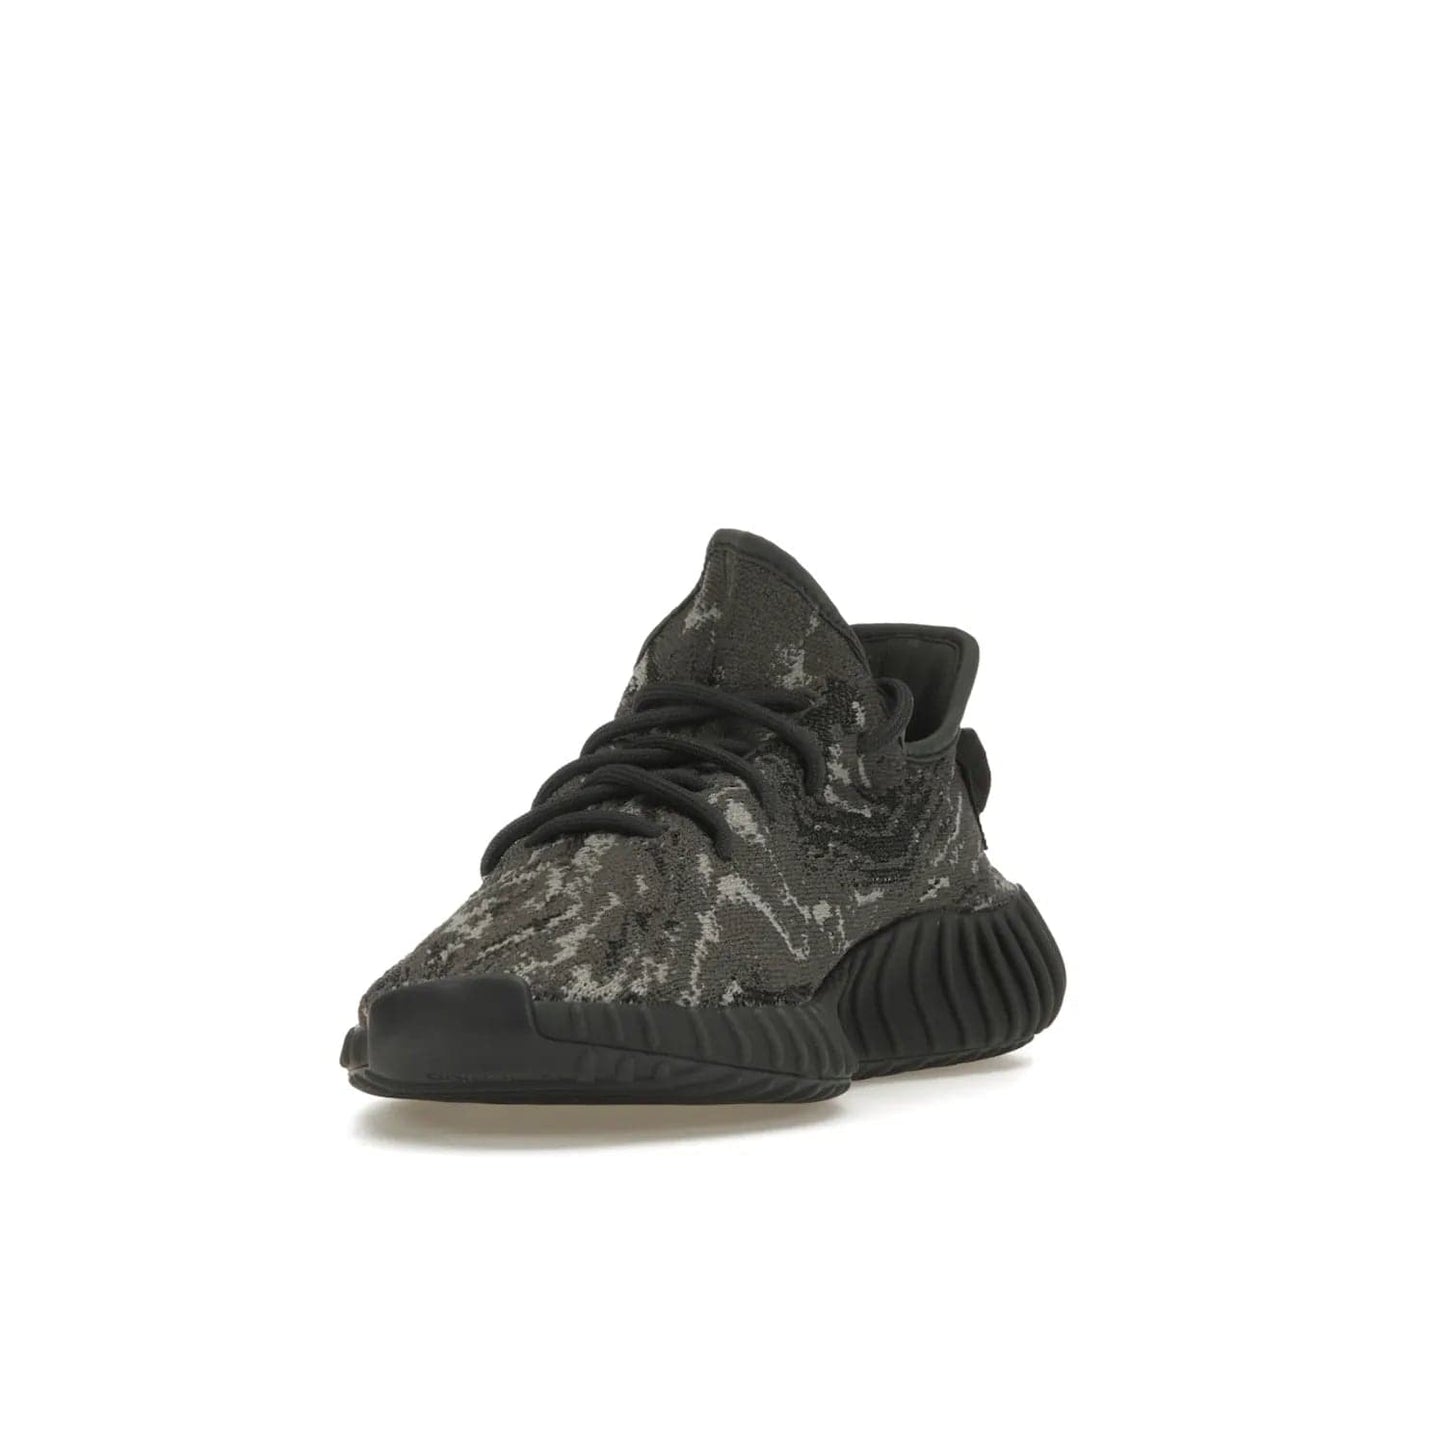 adidas Yeezy Boost 350 V2 MX Dark Salt - Image 13 - Only at www.BallersClubKickz.com - ##
The adidas Yeezy Boost 350 V2 MX Dark Salt offers a contemporary look with a signature combination of grey and black hues. Cushioned Boost midsole and side stripe allow for all day wear. Get the perfect fashion-forward addition with this sleek sneaker for $230.